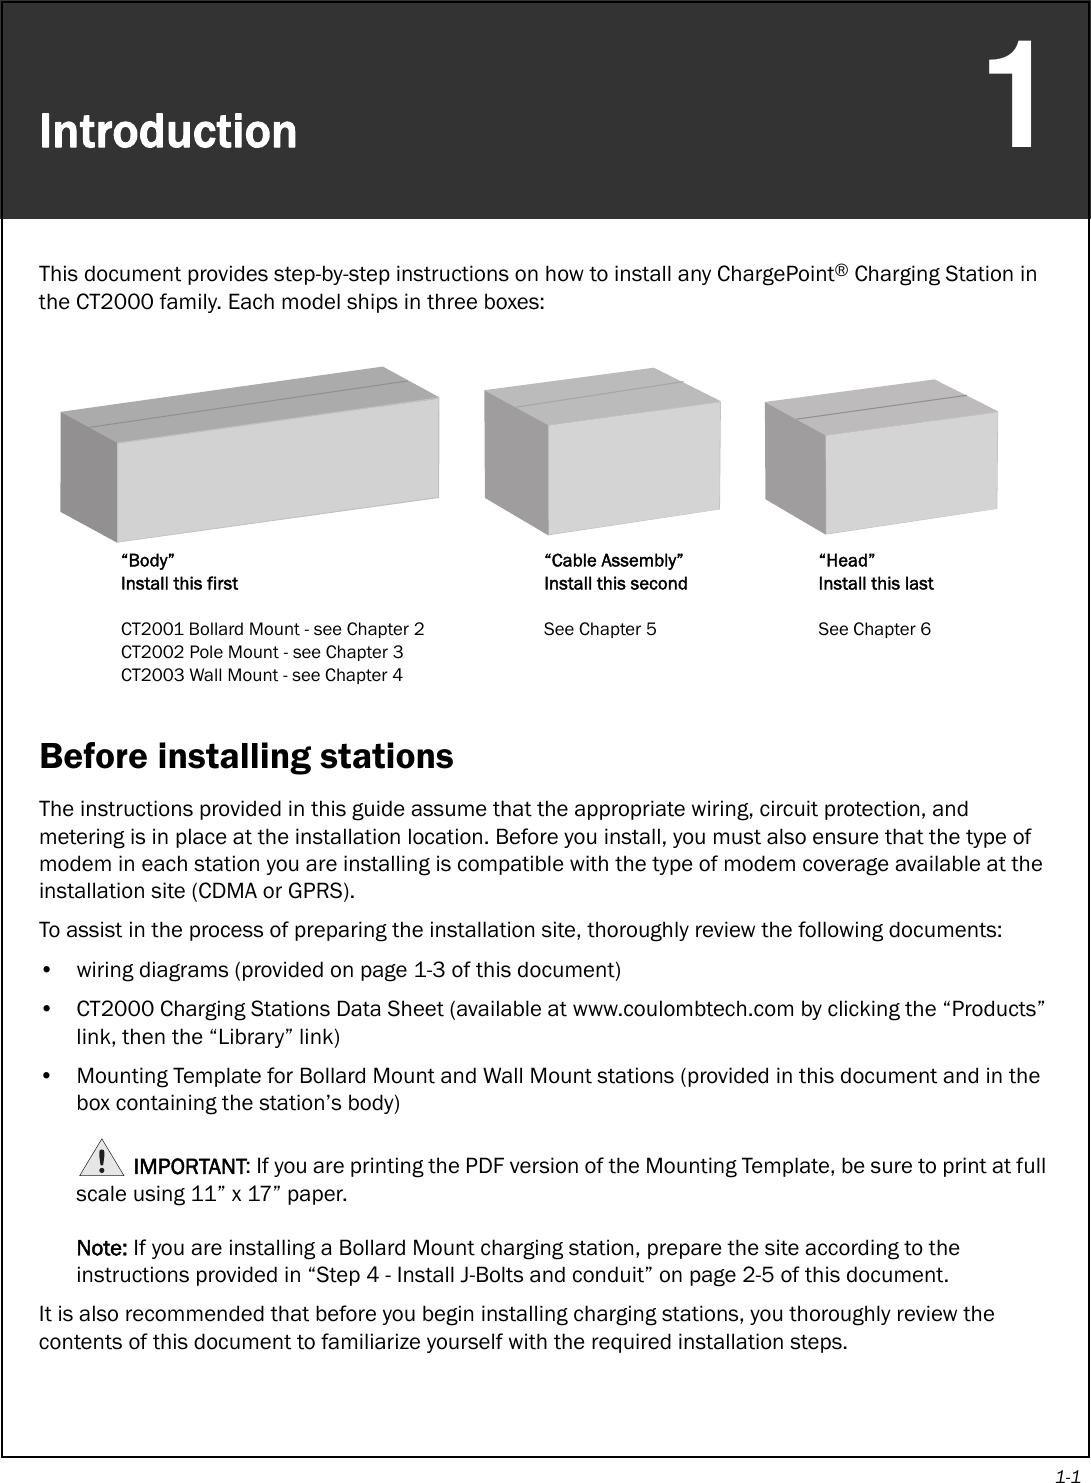 1-1Introduction1This document provides step-by-step instructions on how to install any ChargePoint® Charging Station in the CT2000 family. Each model ships in three boxes:Before installing stationsThe instructions provided in this guide assume that the appropriate wiring, circuit protection, and metering is in place at the installation location. Before you install, you must also ensure that the type of modem in each station you are installing is compatible with the type of modem coverage available at the installation site (CDMA or GPRS).To assist in the process of preparing the installation site, thoroughly review the following documents:• wiring diagrams (provided on page 1-3 of this document)• CT2000 Charging Stations Data Sheet (available at www.coulombtech.com by clicking the “Products” link, then the “Library” link)• Mounting Template for Bollard Mount and Wall Mount stations (provided in this document and in the box containing the station’s body)IMPORTANT: If you are printing the PDF version of the Mounting Template, be sure to print at full scale using 11” x 17” paper. Note: If you are installing a Bollard Mount charging station, prepare the site according to the instructions provided in “Step 4 - Install J-Bolts and conduit” on page 2-5 of this document.It is also recommended that before you begin installing charging stations, you thoroughly review the contents of this document to familiarize yourself with the required installation steps.“Body”Install this firstCT2001 Bollard Mount - see Chapter 2CT2002 Pole Mount - see Chapter 3CT2003 Wall Mount - see Chapter 4“Cable Assembly”Install this secondSee Chapter 5“Head”Install this lastSee Chapter 6